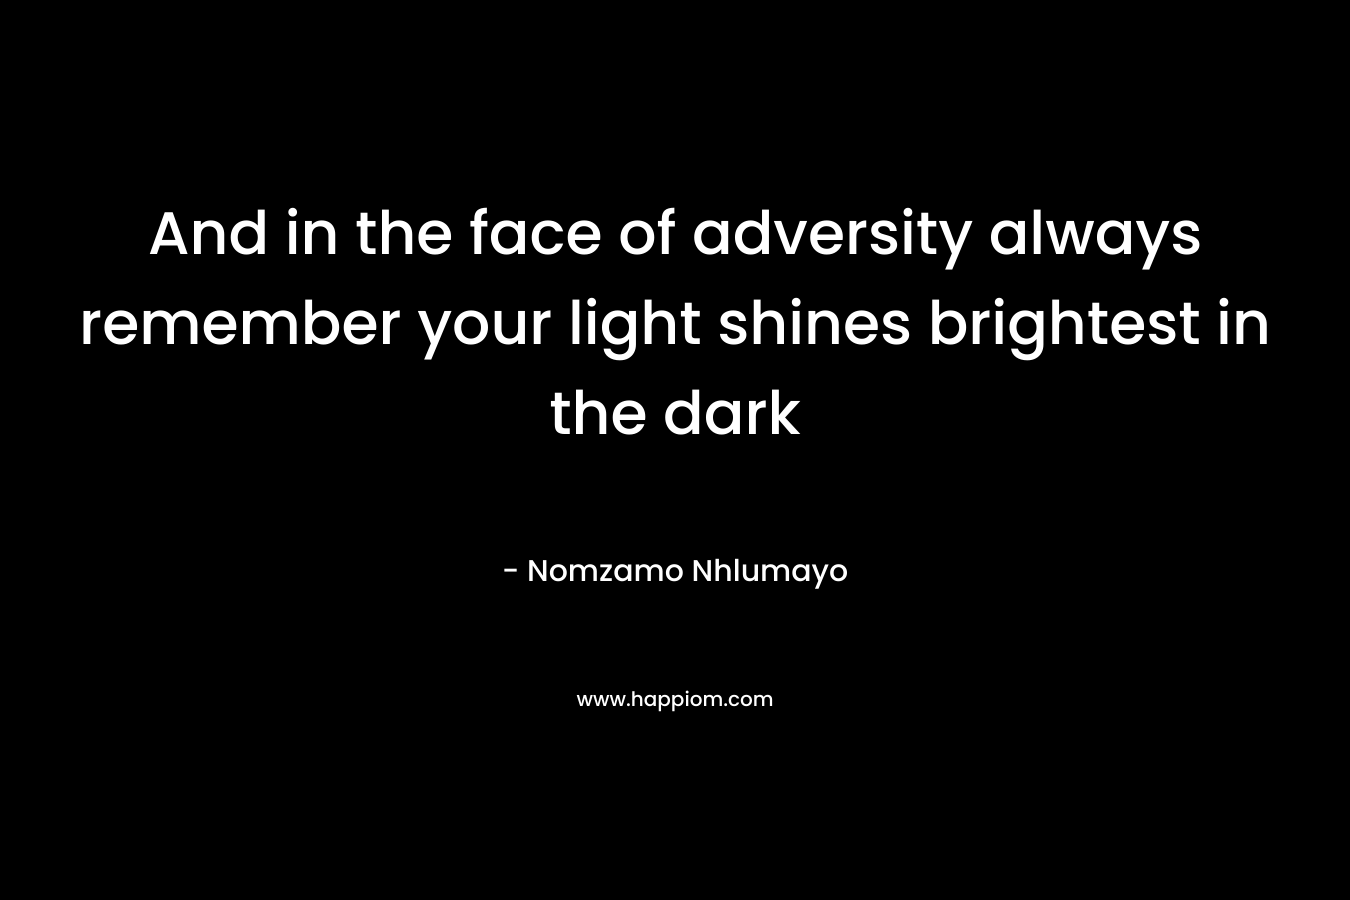 And in the face of adversity always remember your light shines brightest in the dark – Nomzamo Nhlumayo